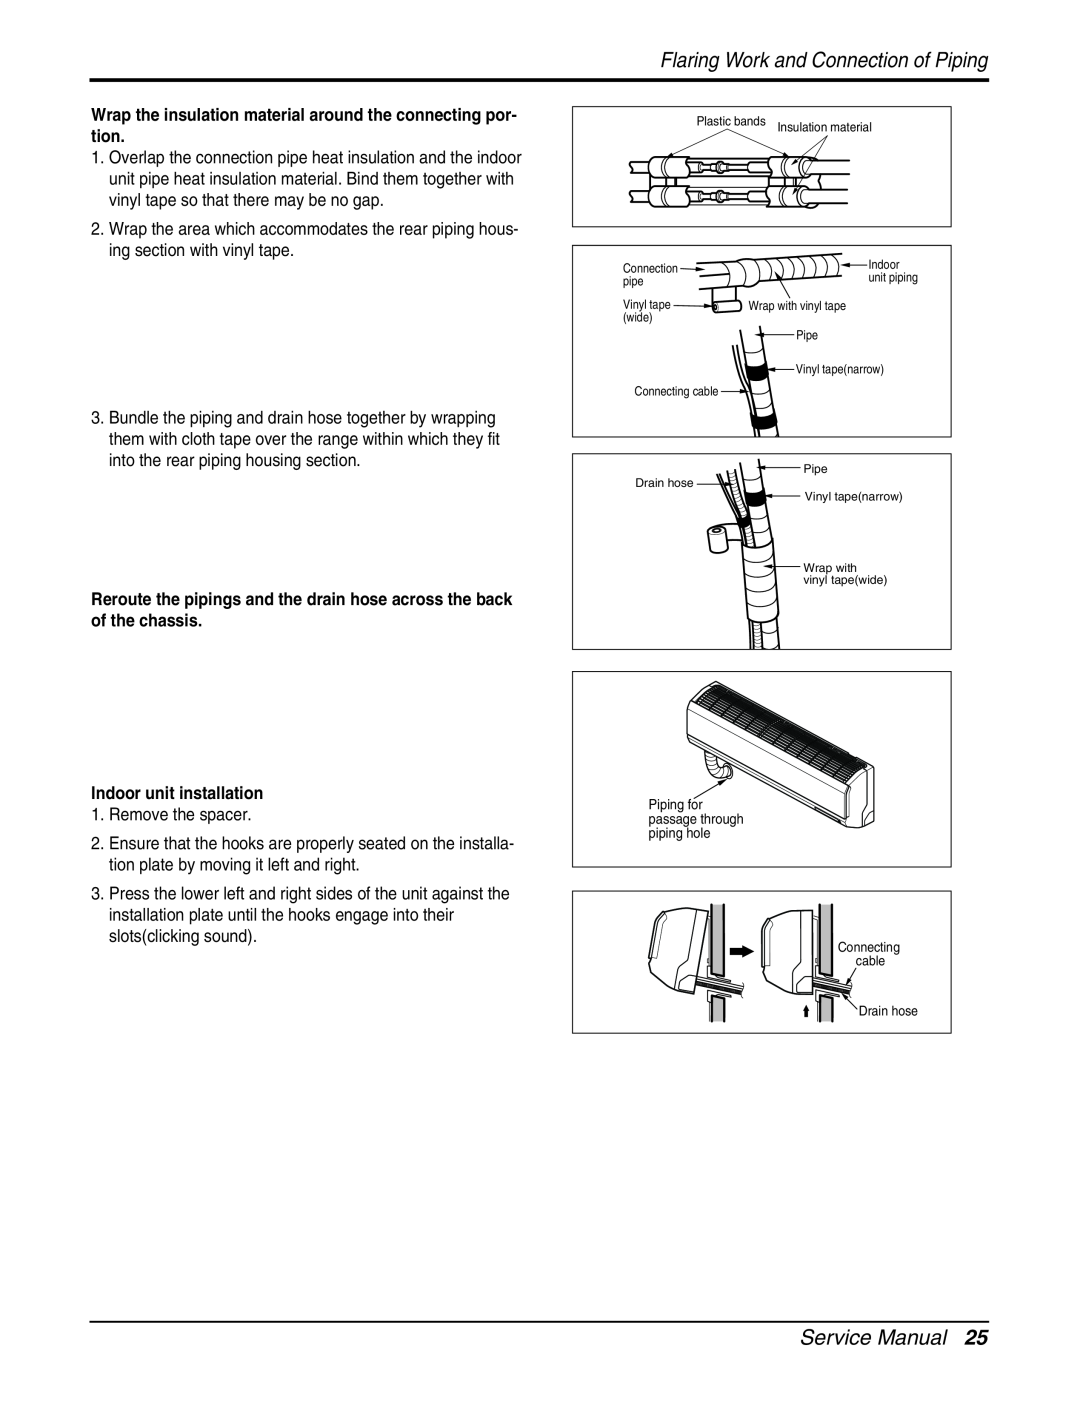 LG Electronics AMNC123DEA0 (LMN120CE) Flaring Work and Connection of Piping, Service Manual, Indoor unit installation 